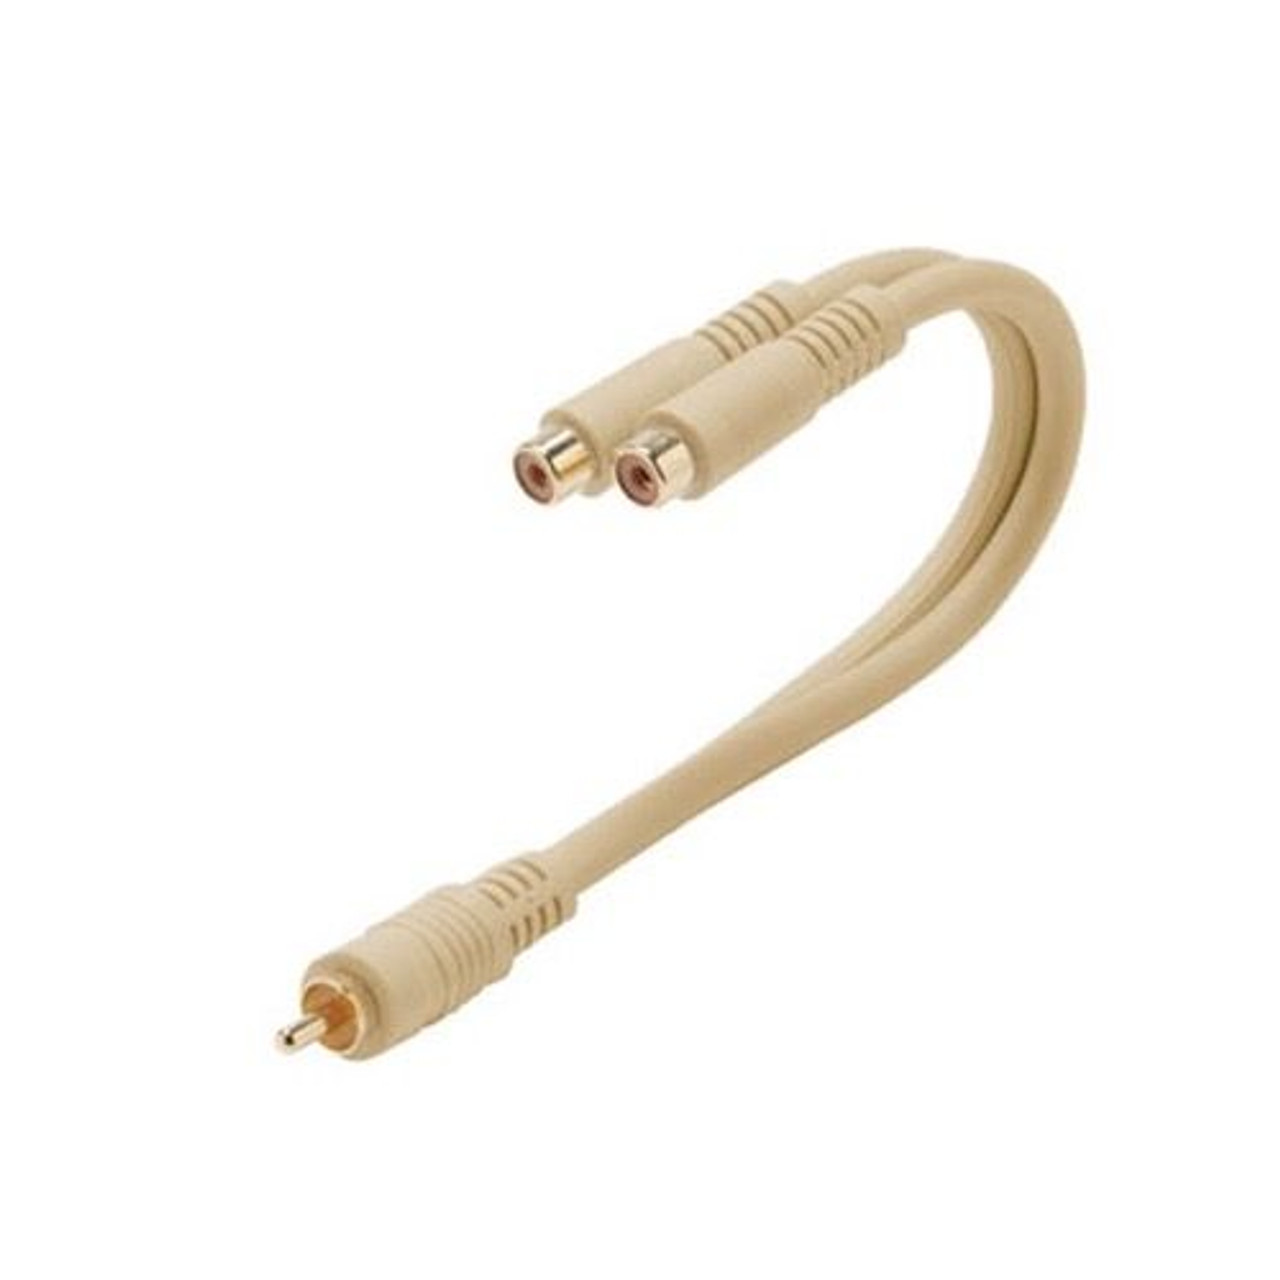 Eagle 6" Inch RCA Male to 2 Dual RCA Female Cable Python Y Adapter Gold Home Theater Splitter Stereo Y-Cable Splitter Adapter Fully Molded 24K Gold Plated Heavy Duty Ultra Flex Interconnect Cable